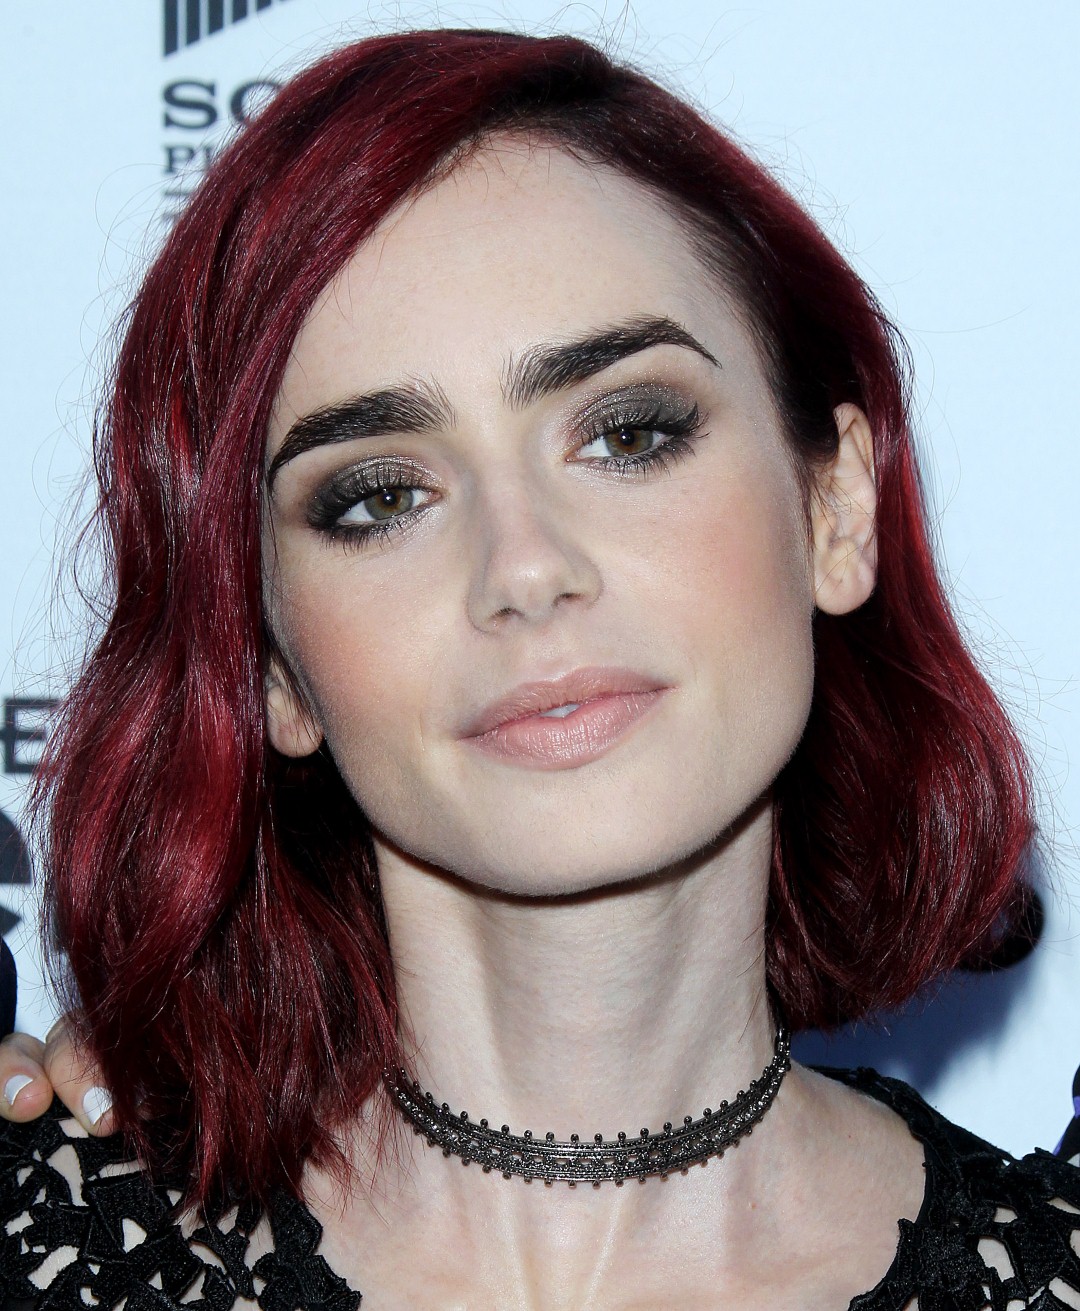 lily-collins-sony-pictures-tv-social-soiree-in-culver-city-june-28-33-pics-7 (Large).jpg